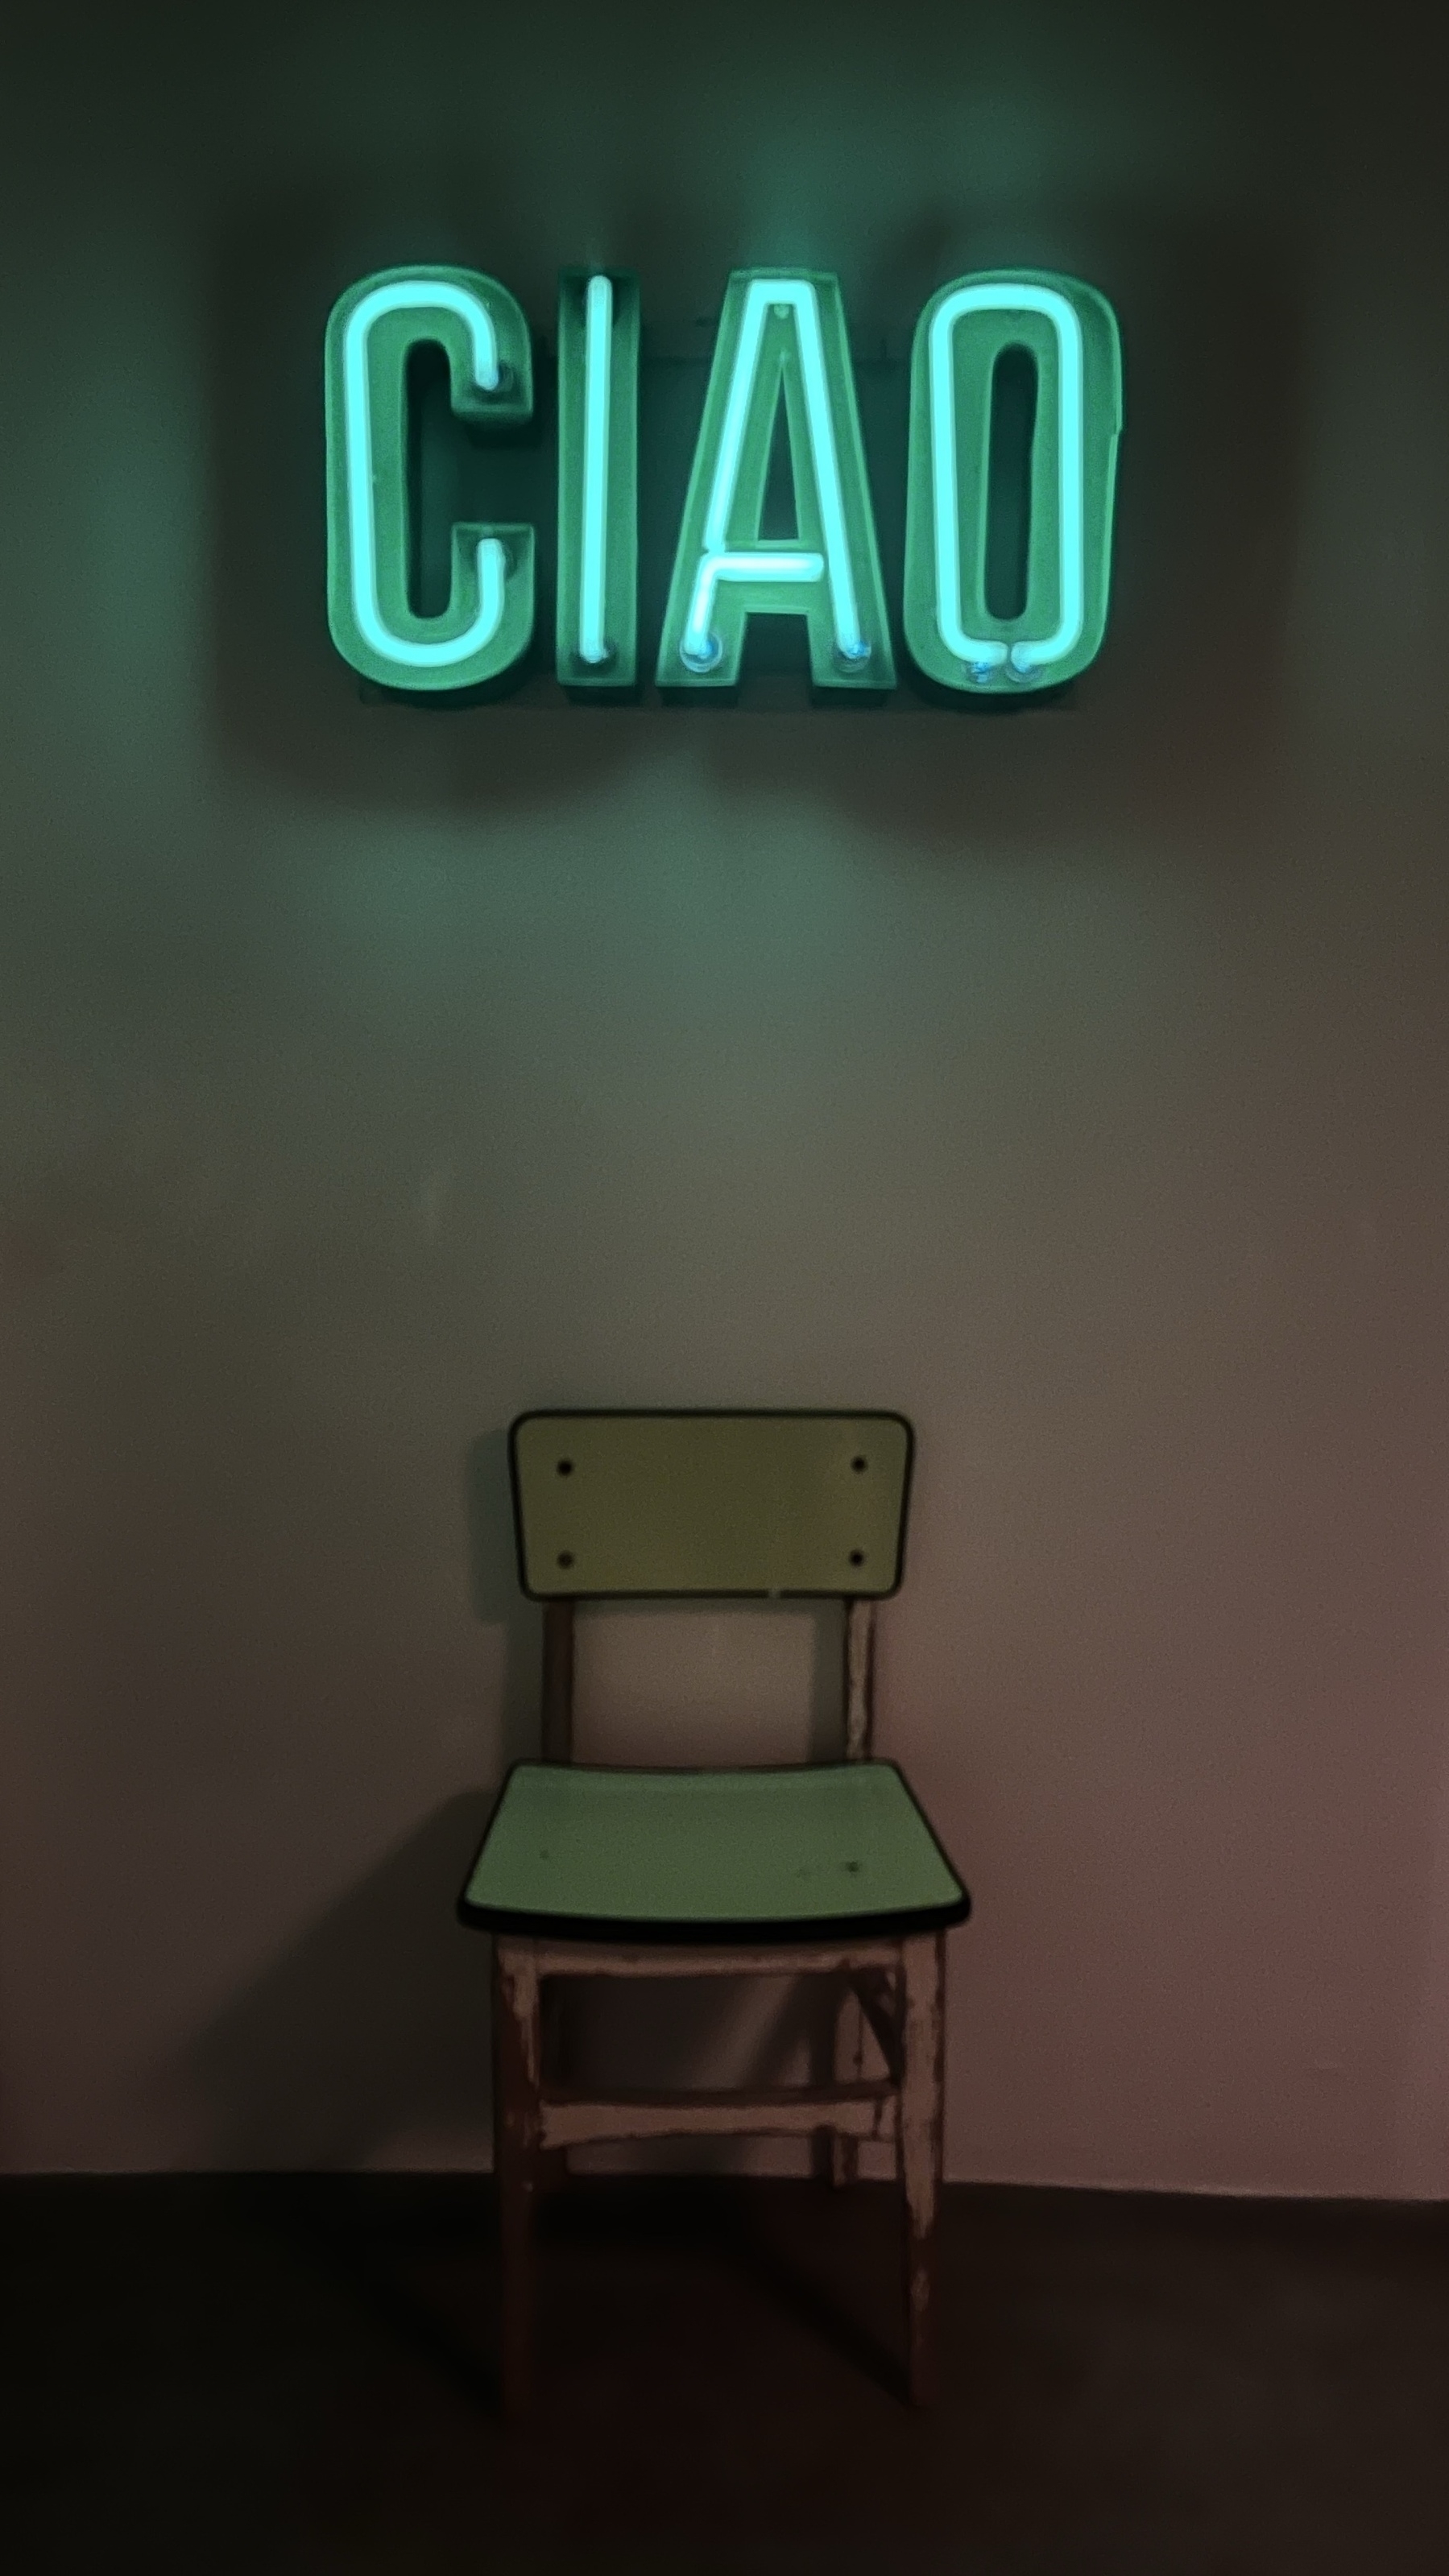 A green neon sign spelling out CIAO hanging on a white wall. Below is a simple chair with a green back and green seat.